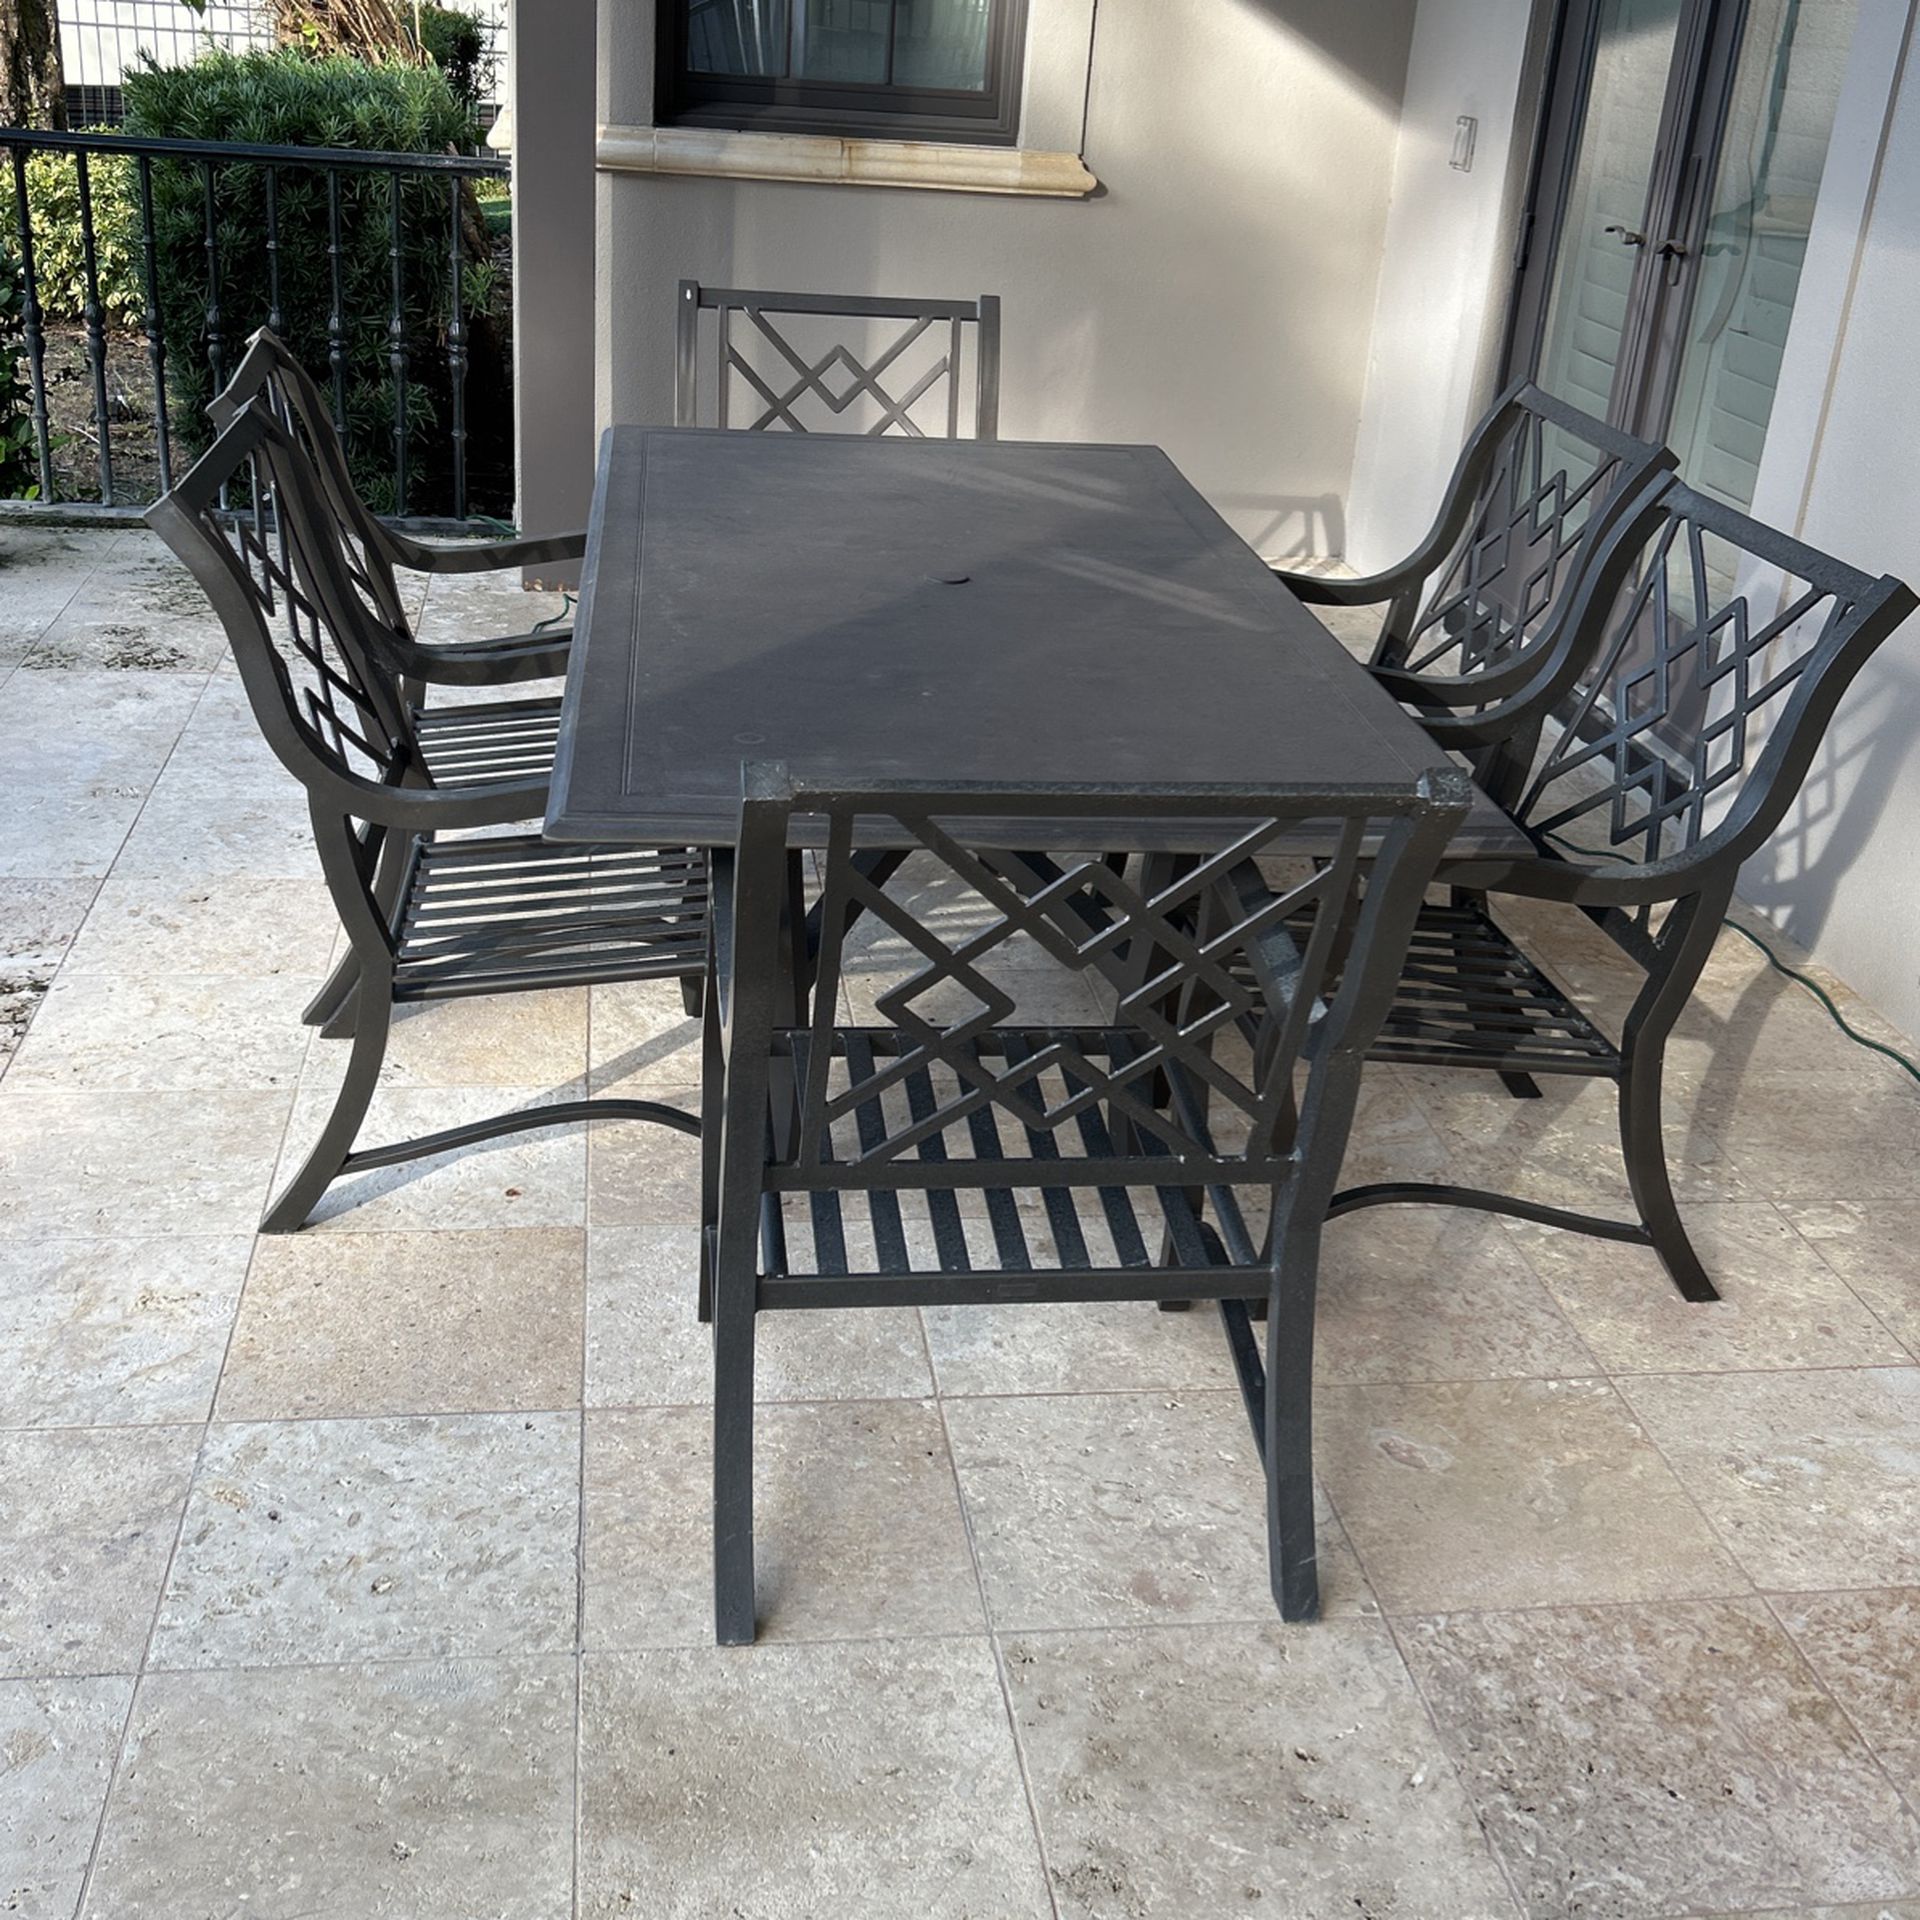 Patio Furniture Dining Table Set 6 Chairs Cushions And Table 